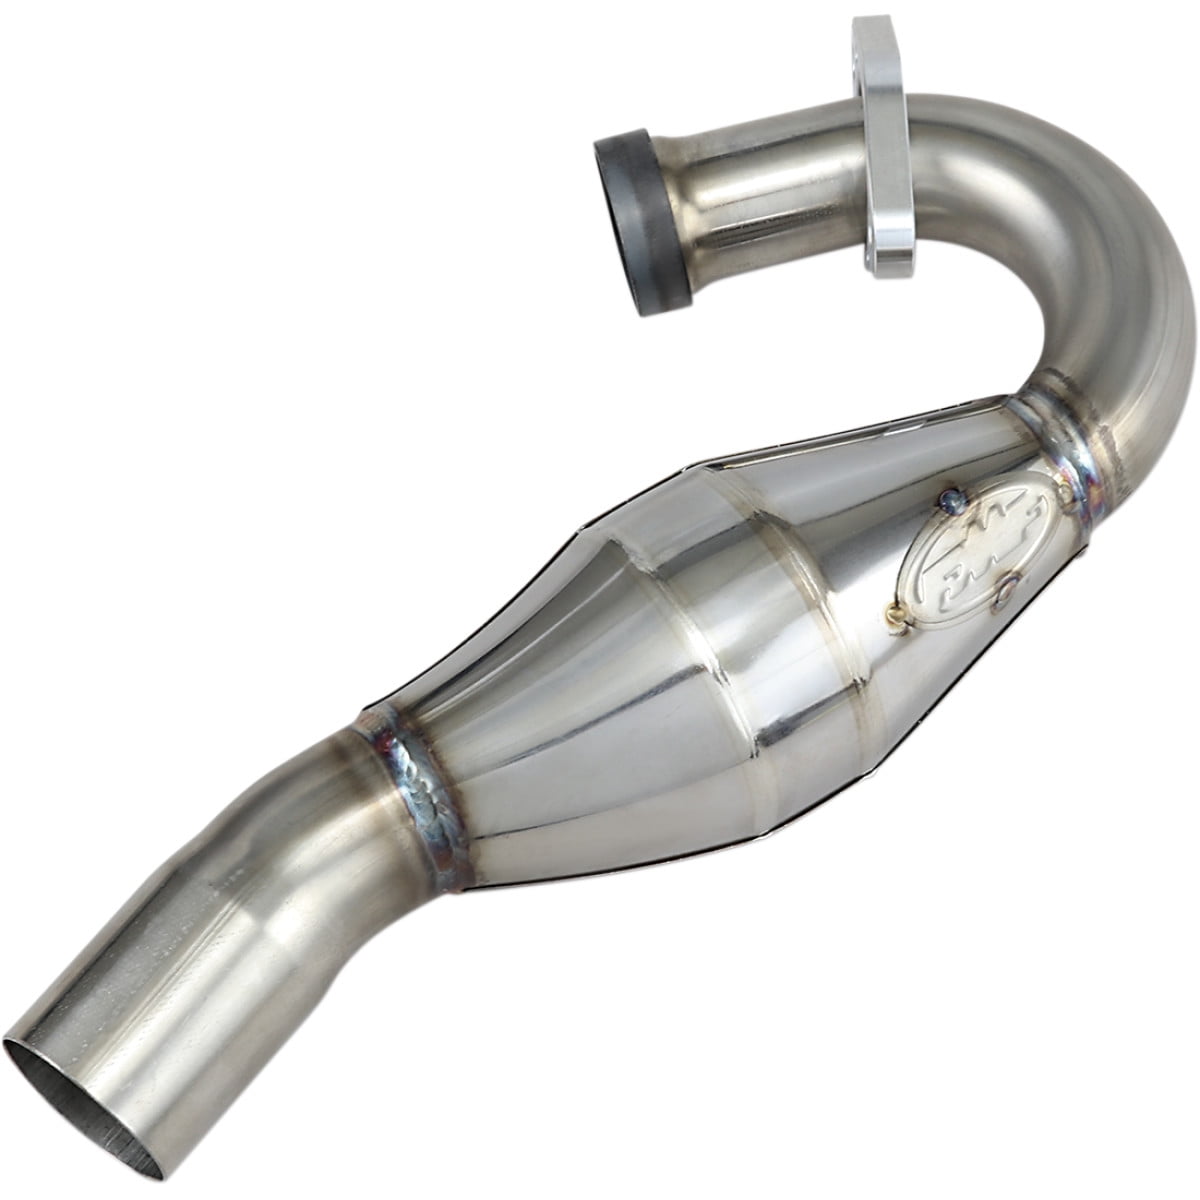 Stainless Steel Header Exhaust Head Pipe for 2003-2006 Yamaha YZ 450F WR450 F